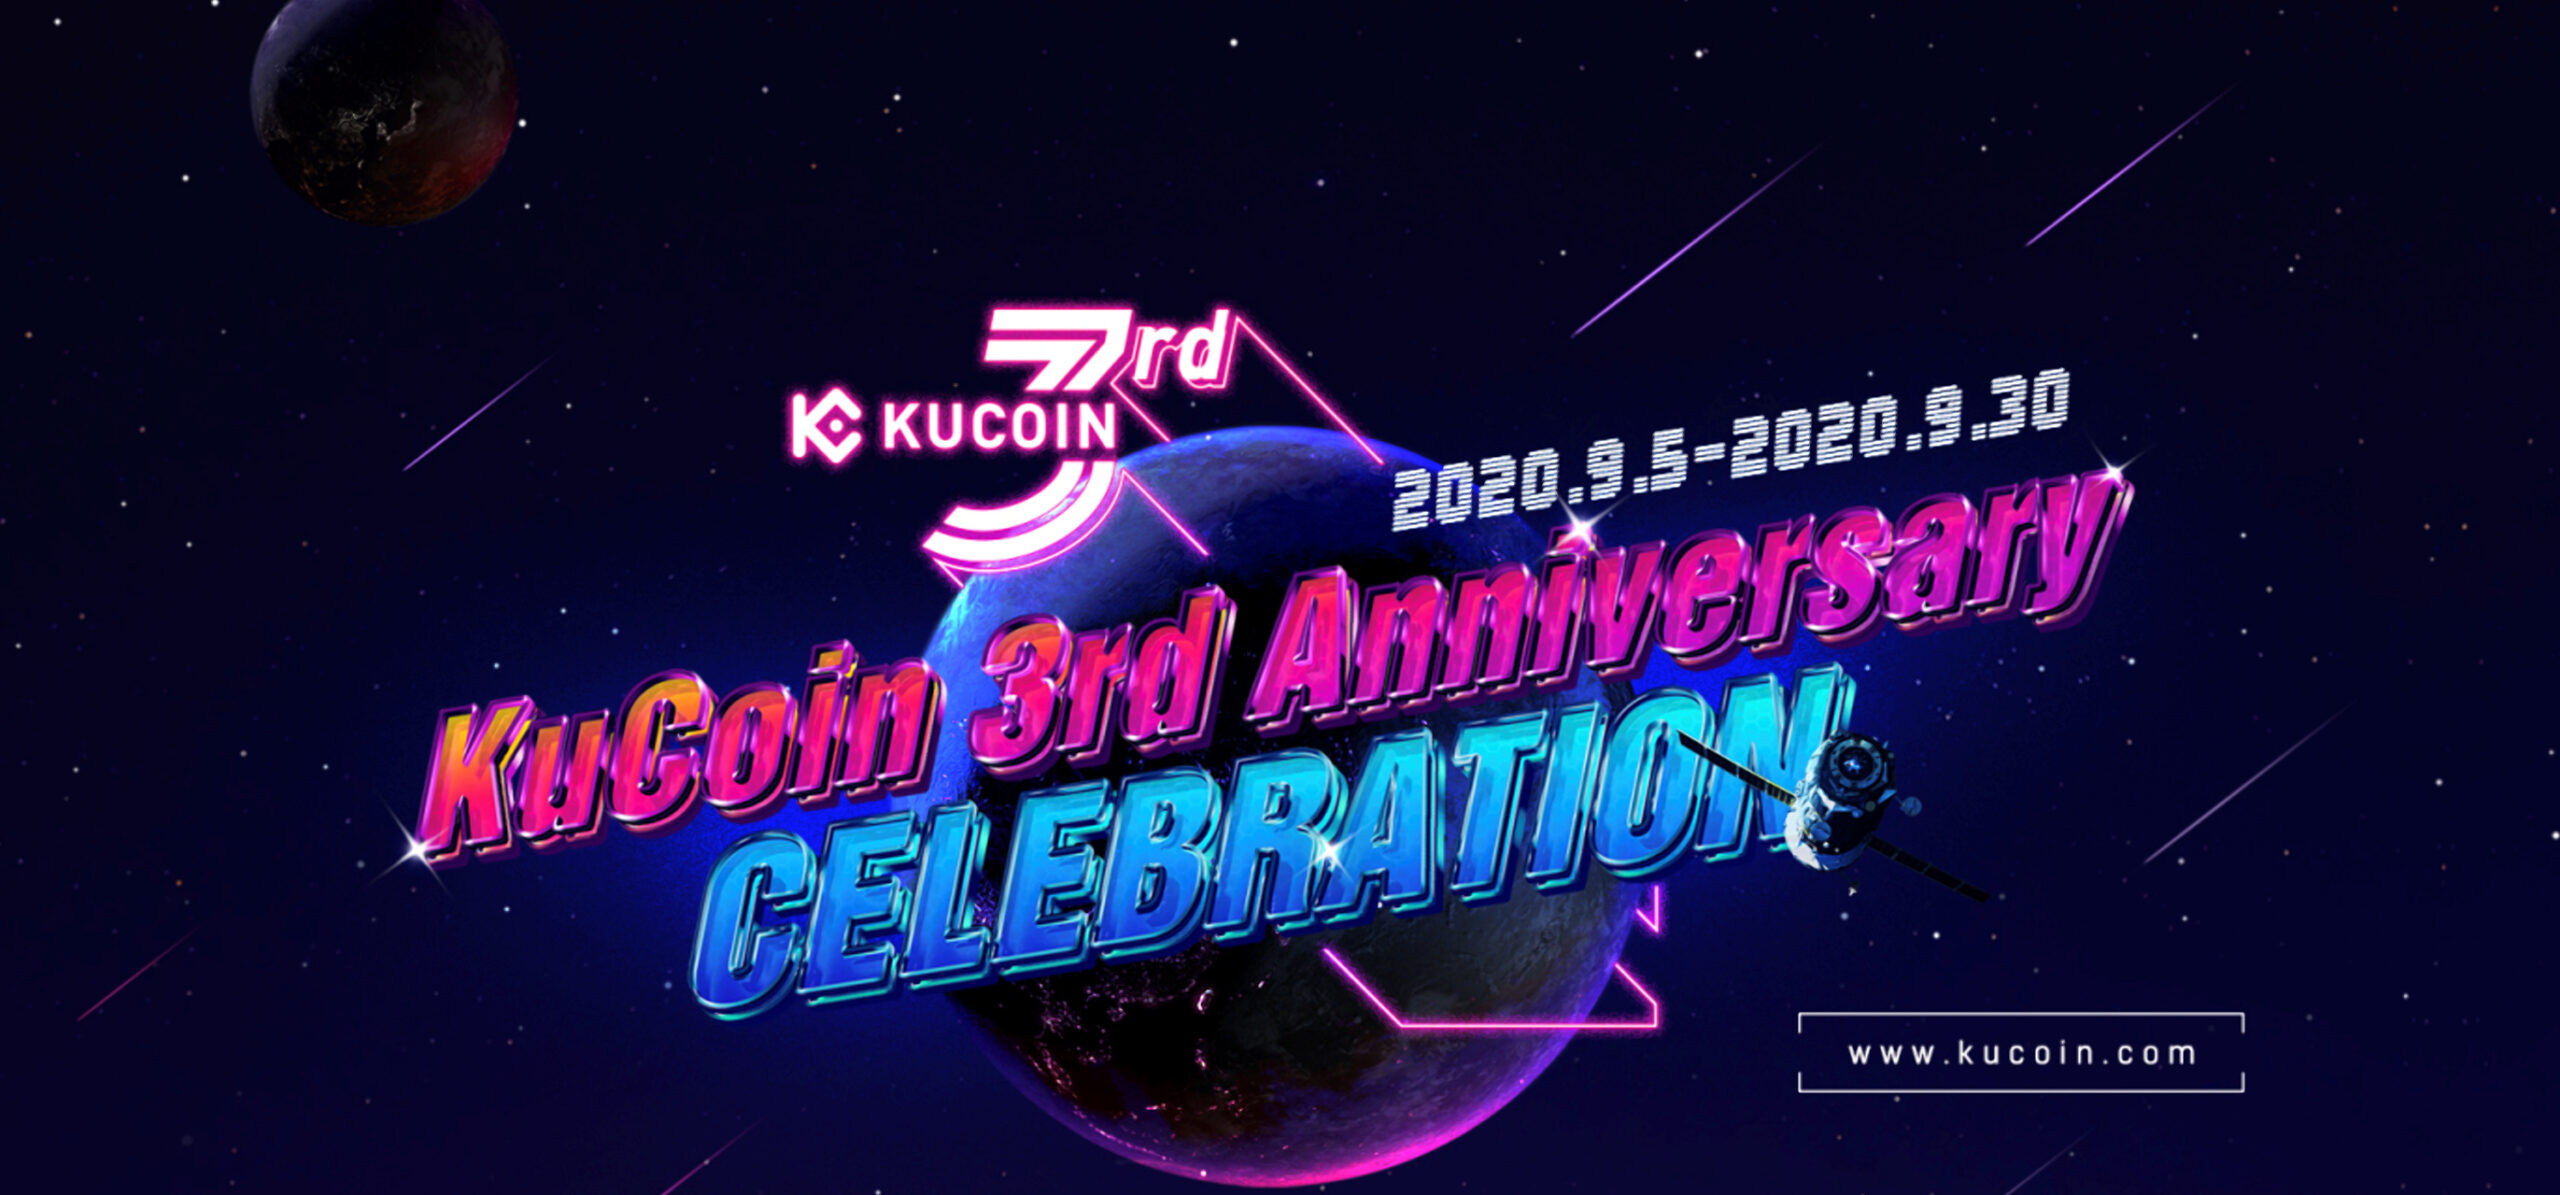 3rd Anniversary with New Spotlight from KuCoin